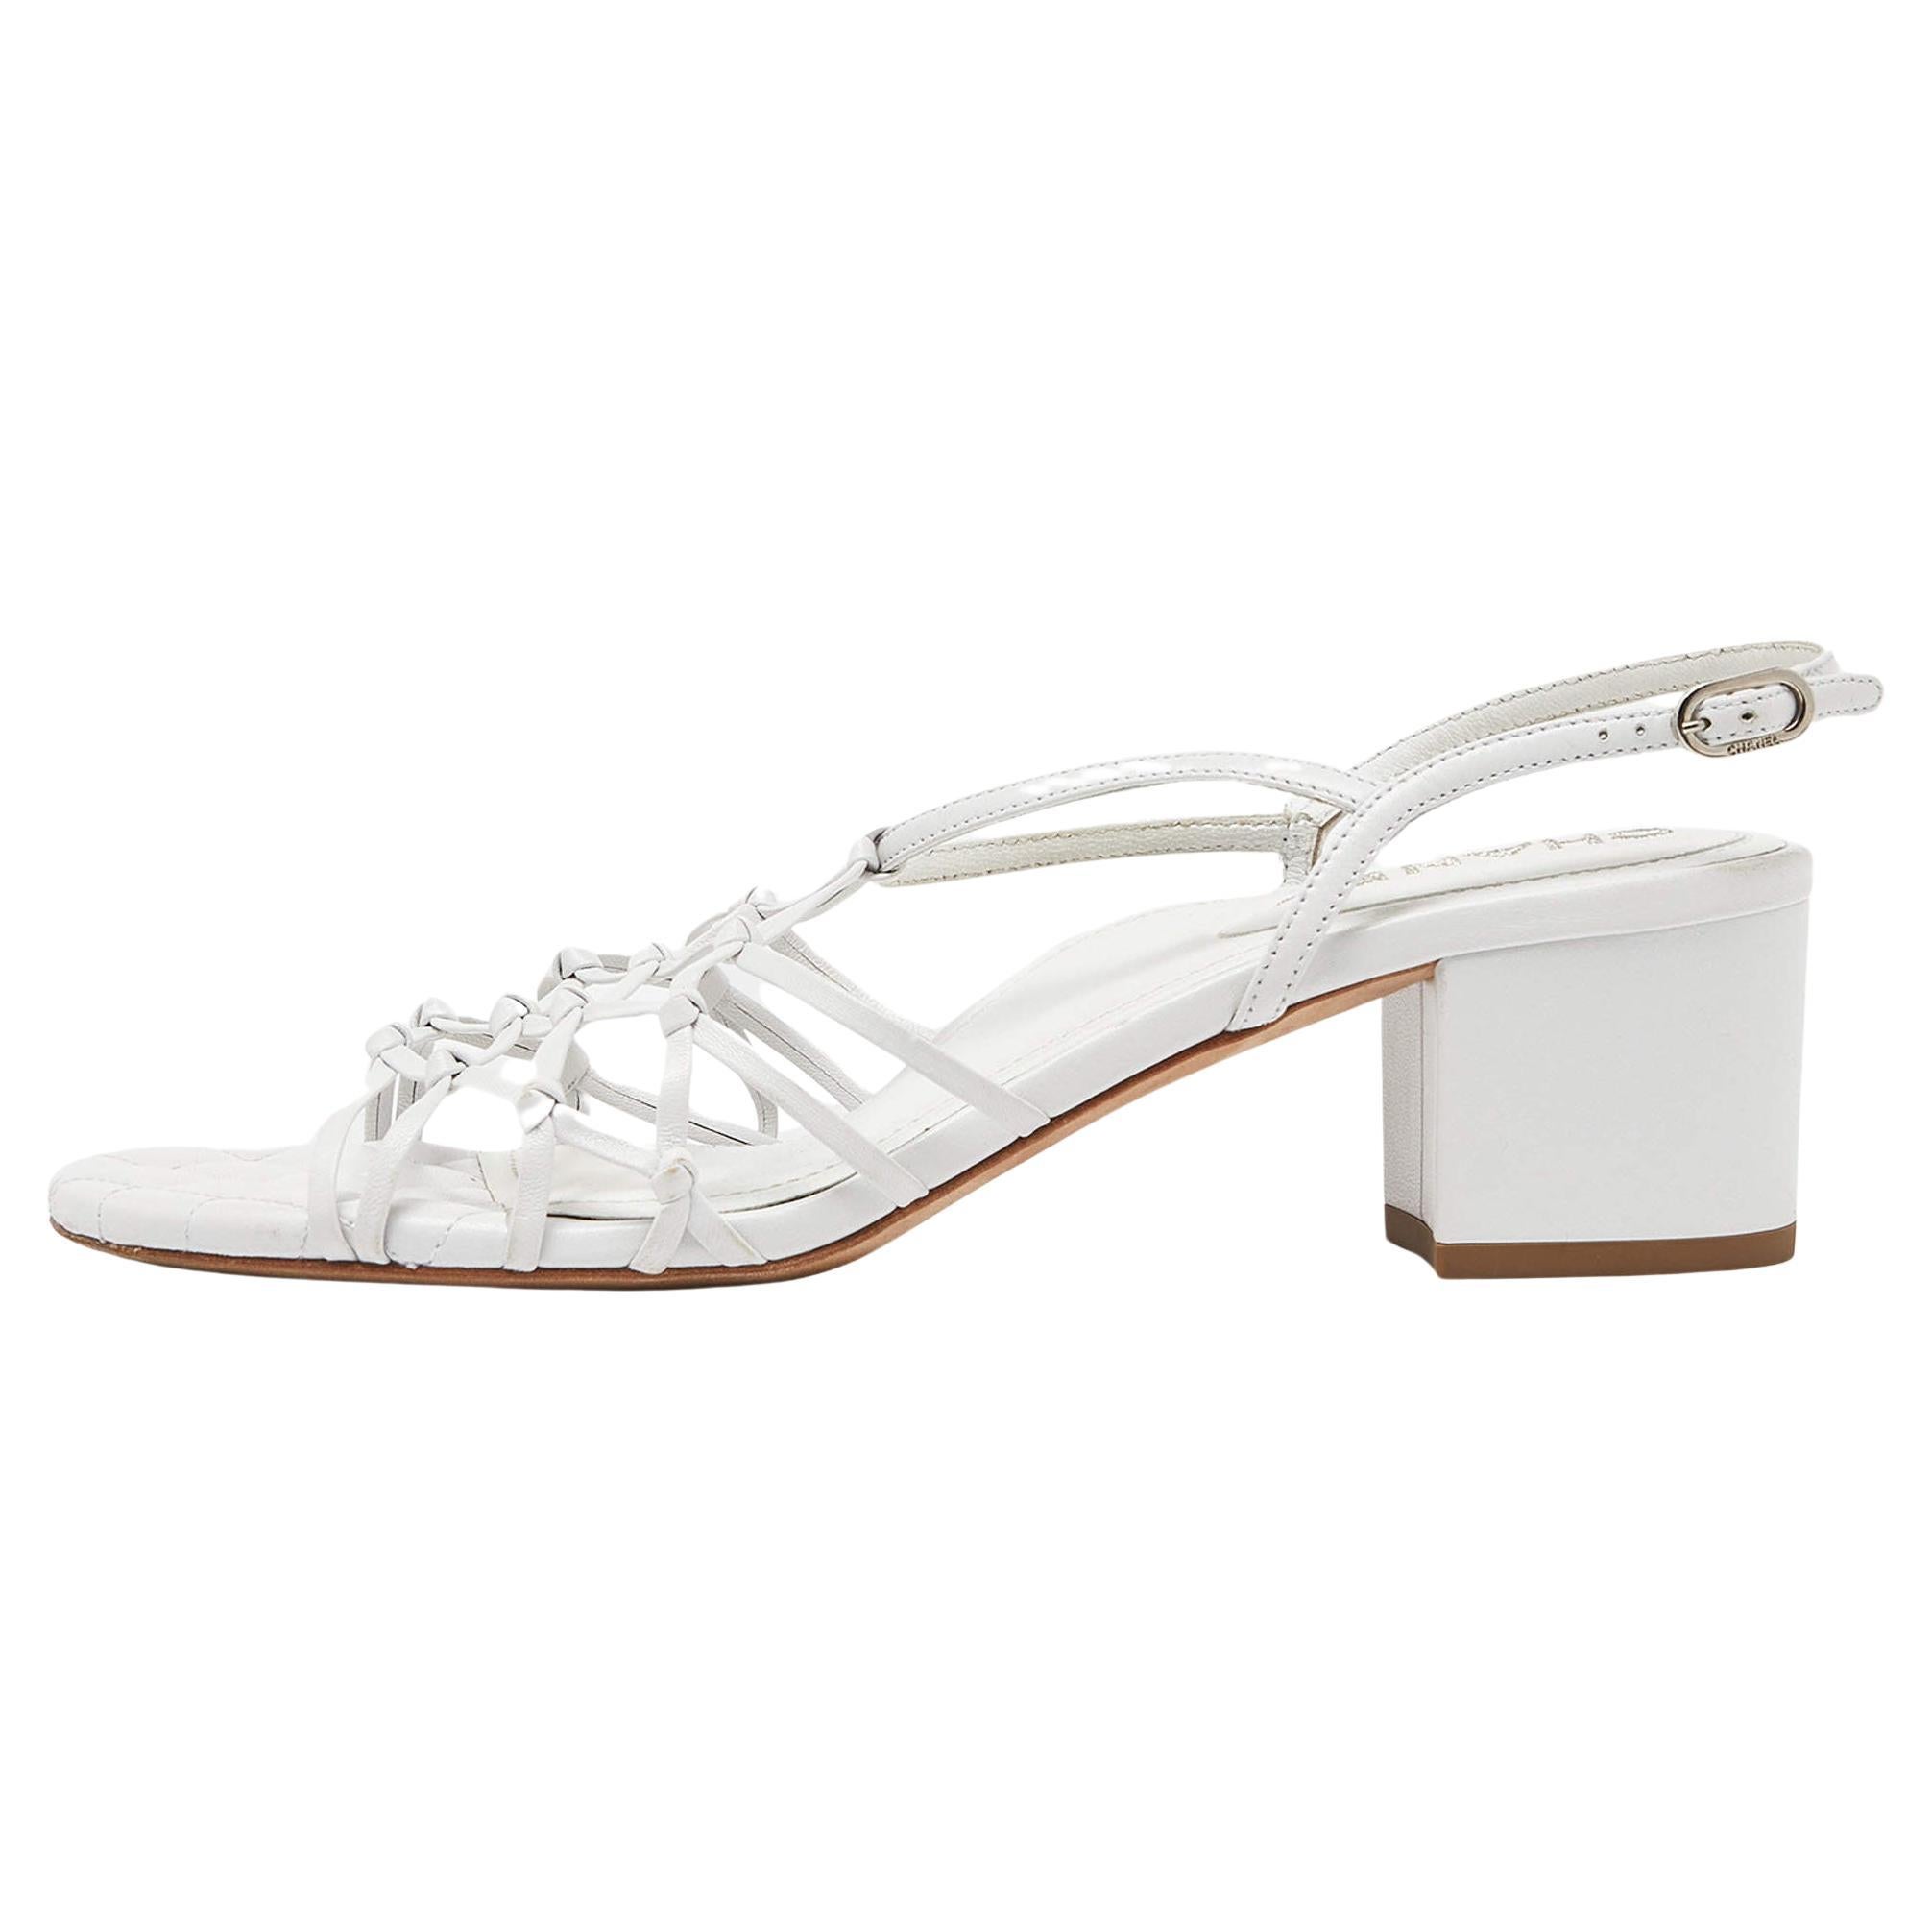 Chanel White Leather Slingback Sandals Size 39.5 For Sale